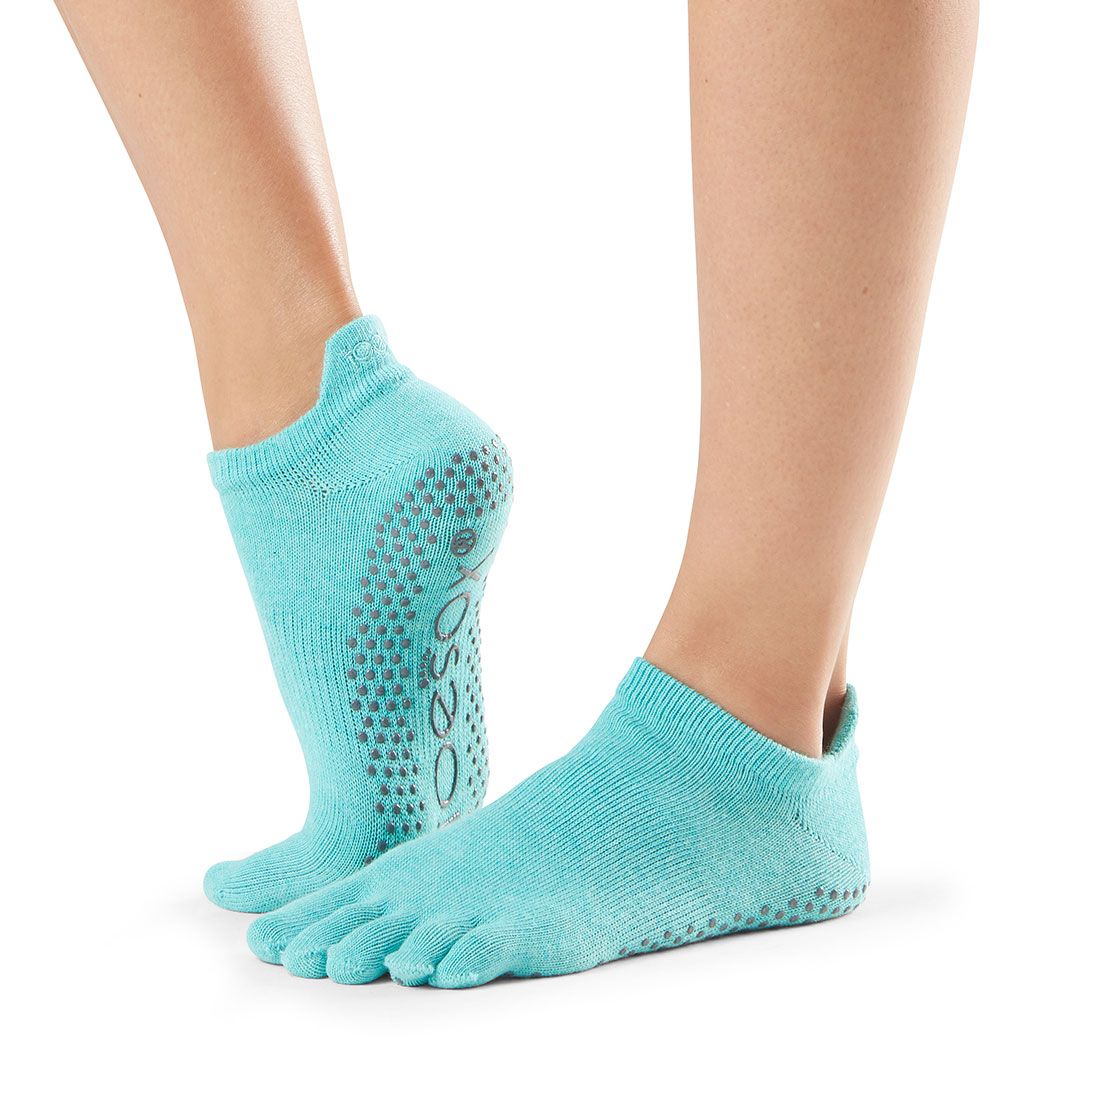 ToeSox Low Rise Full toe - turquoise blue toe socks with gripper sole, perfect for pilates and yoga